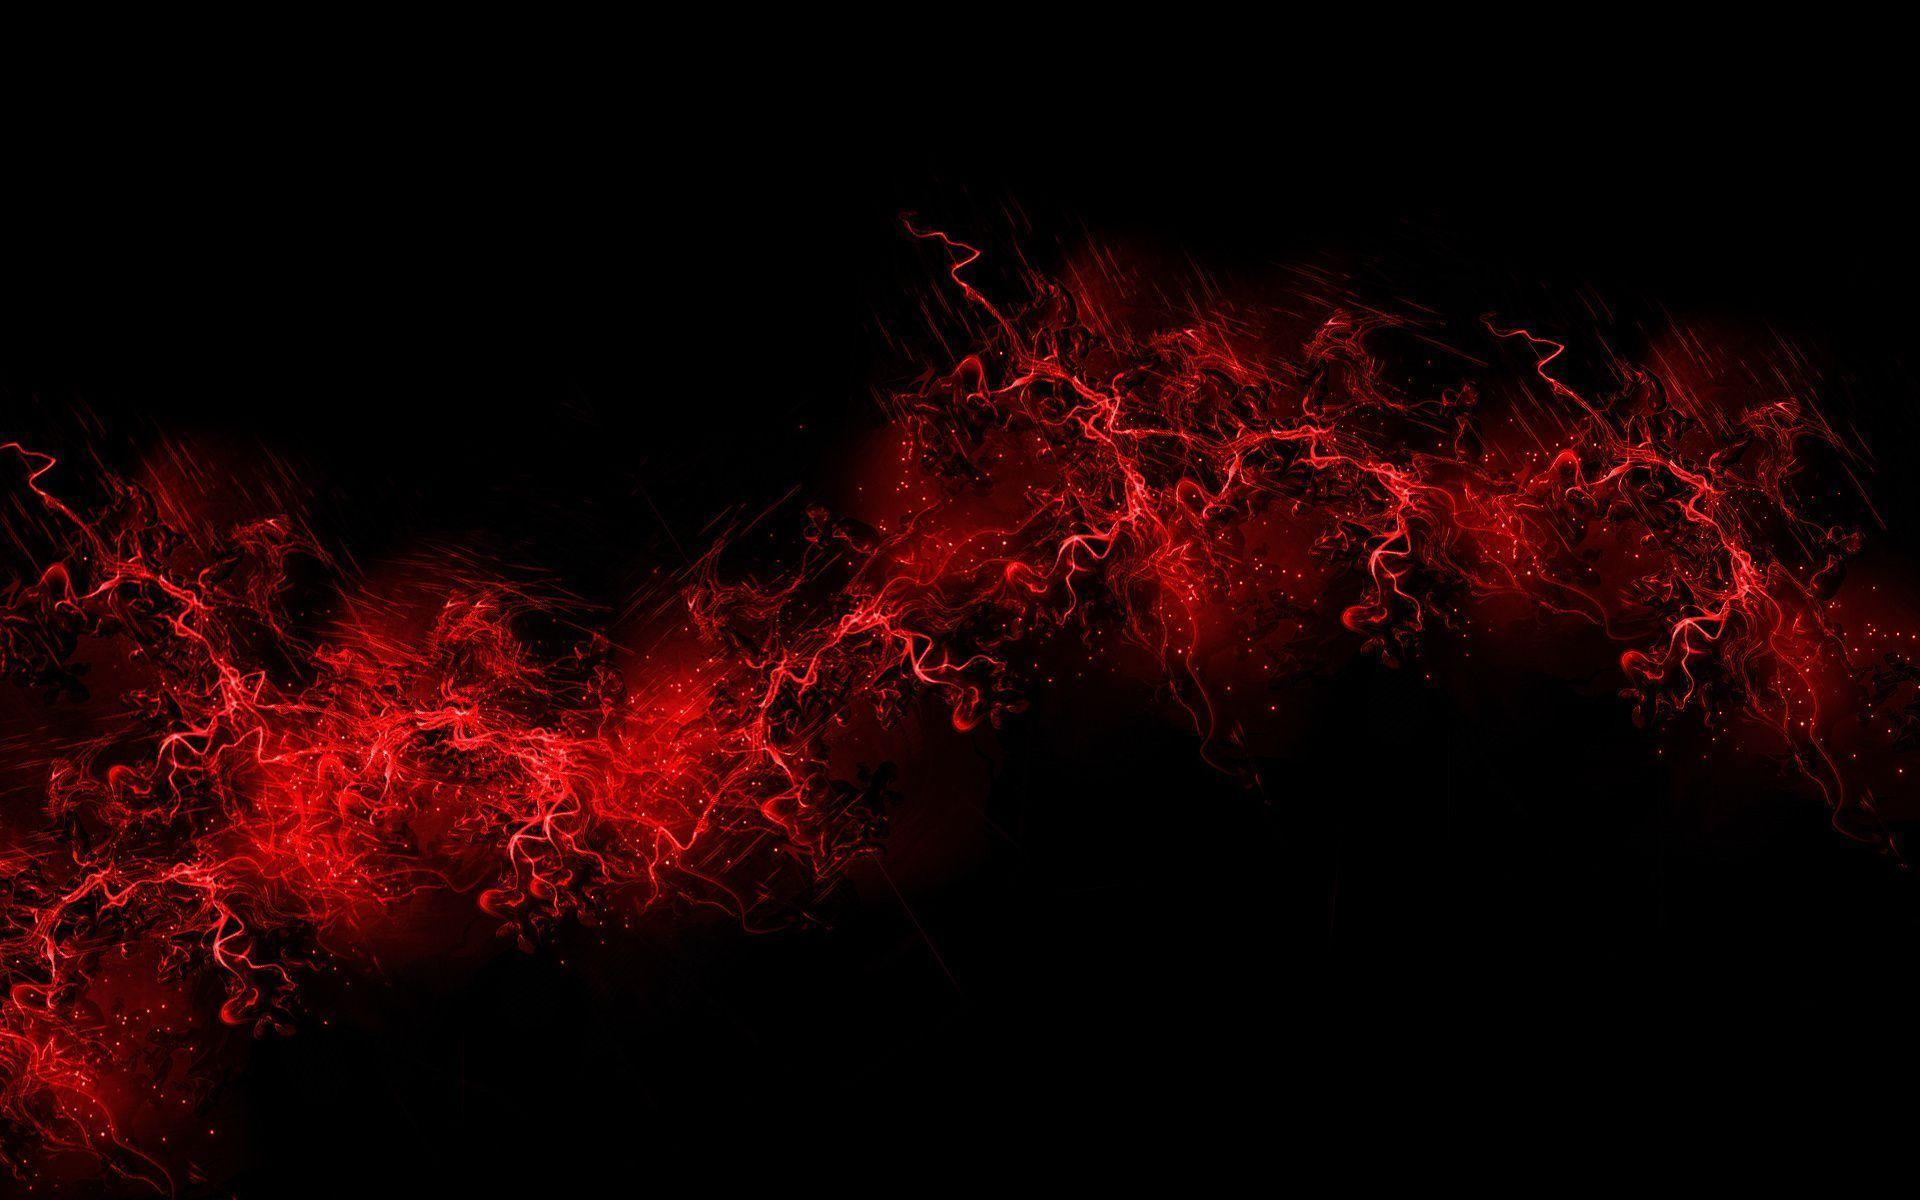 Digital blood electricity, bloody powerpoint hd picture download